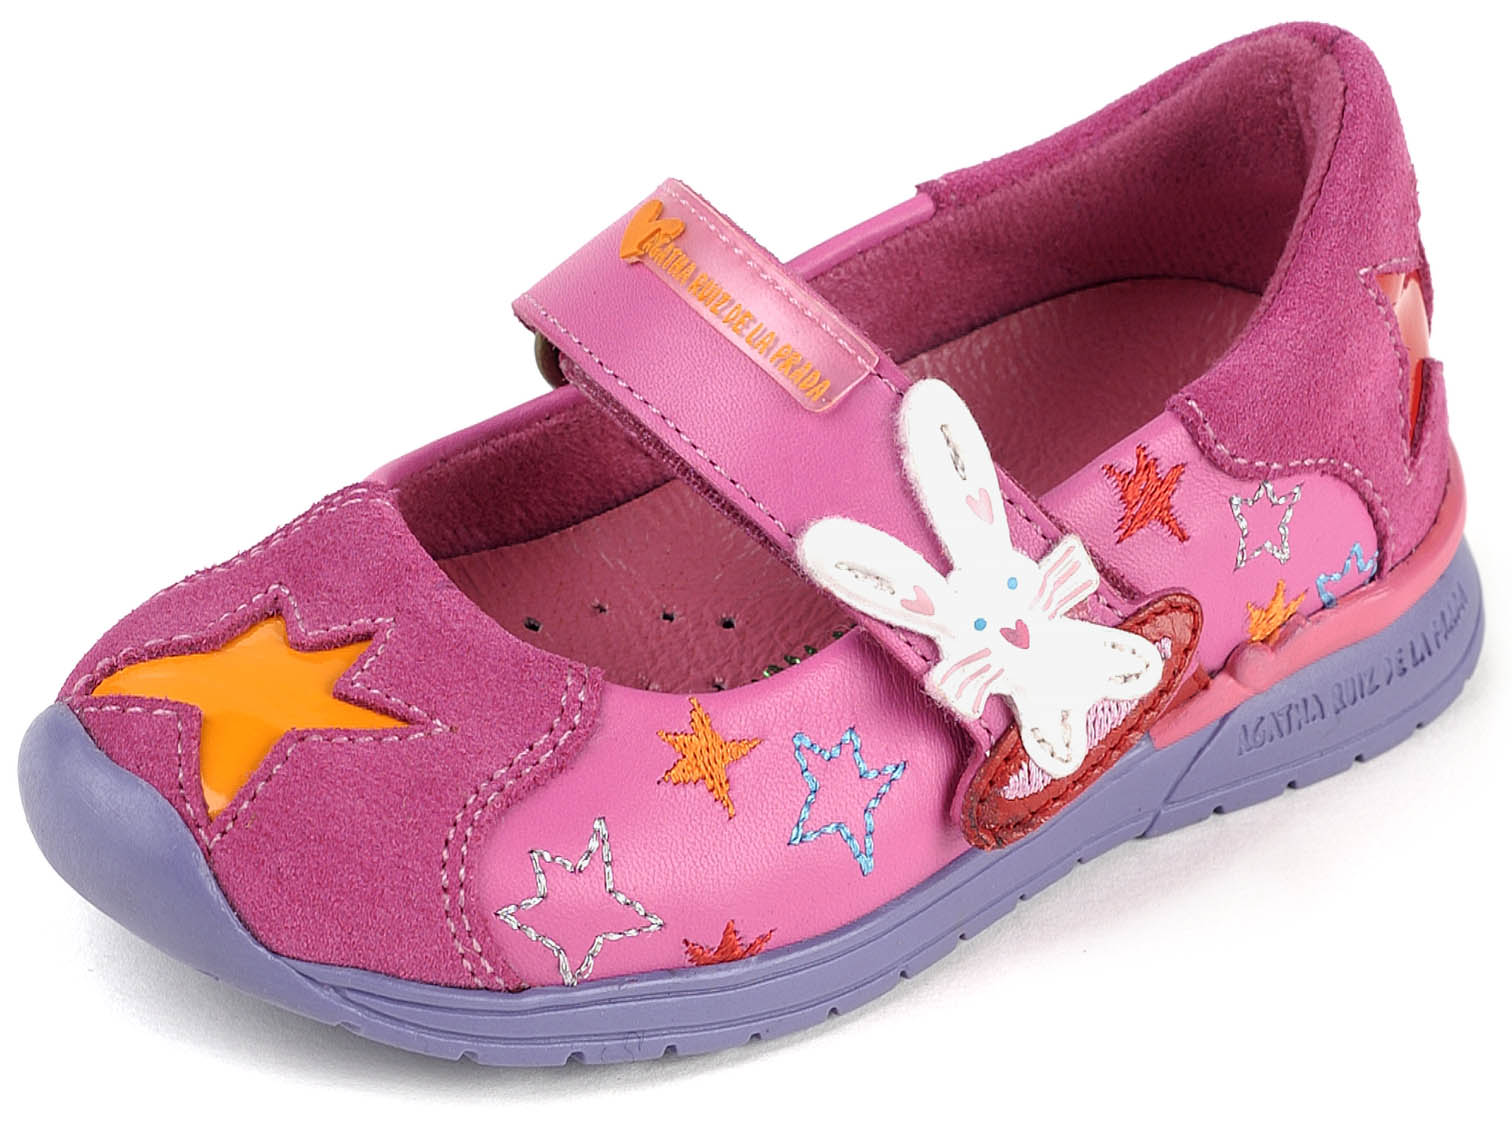 Kids Shoes 2 U: Magic Shoes & Boots For This Winter